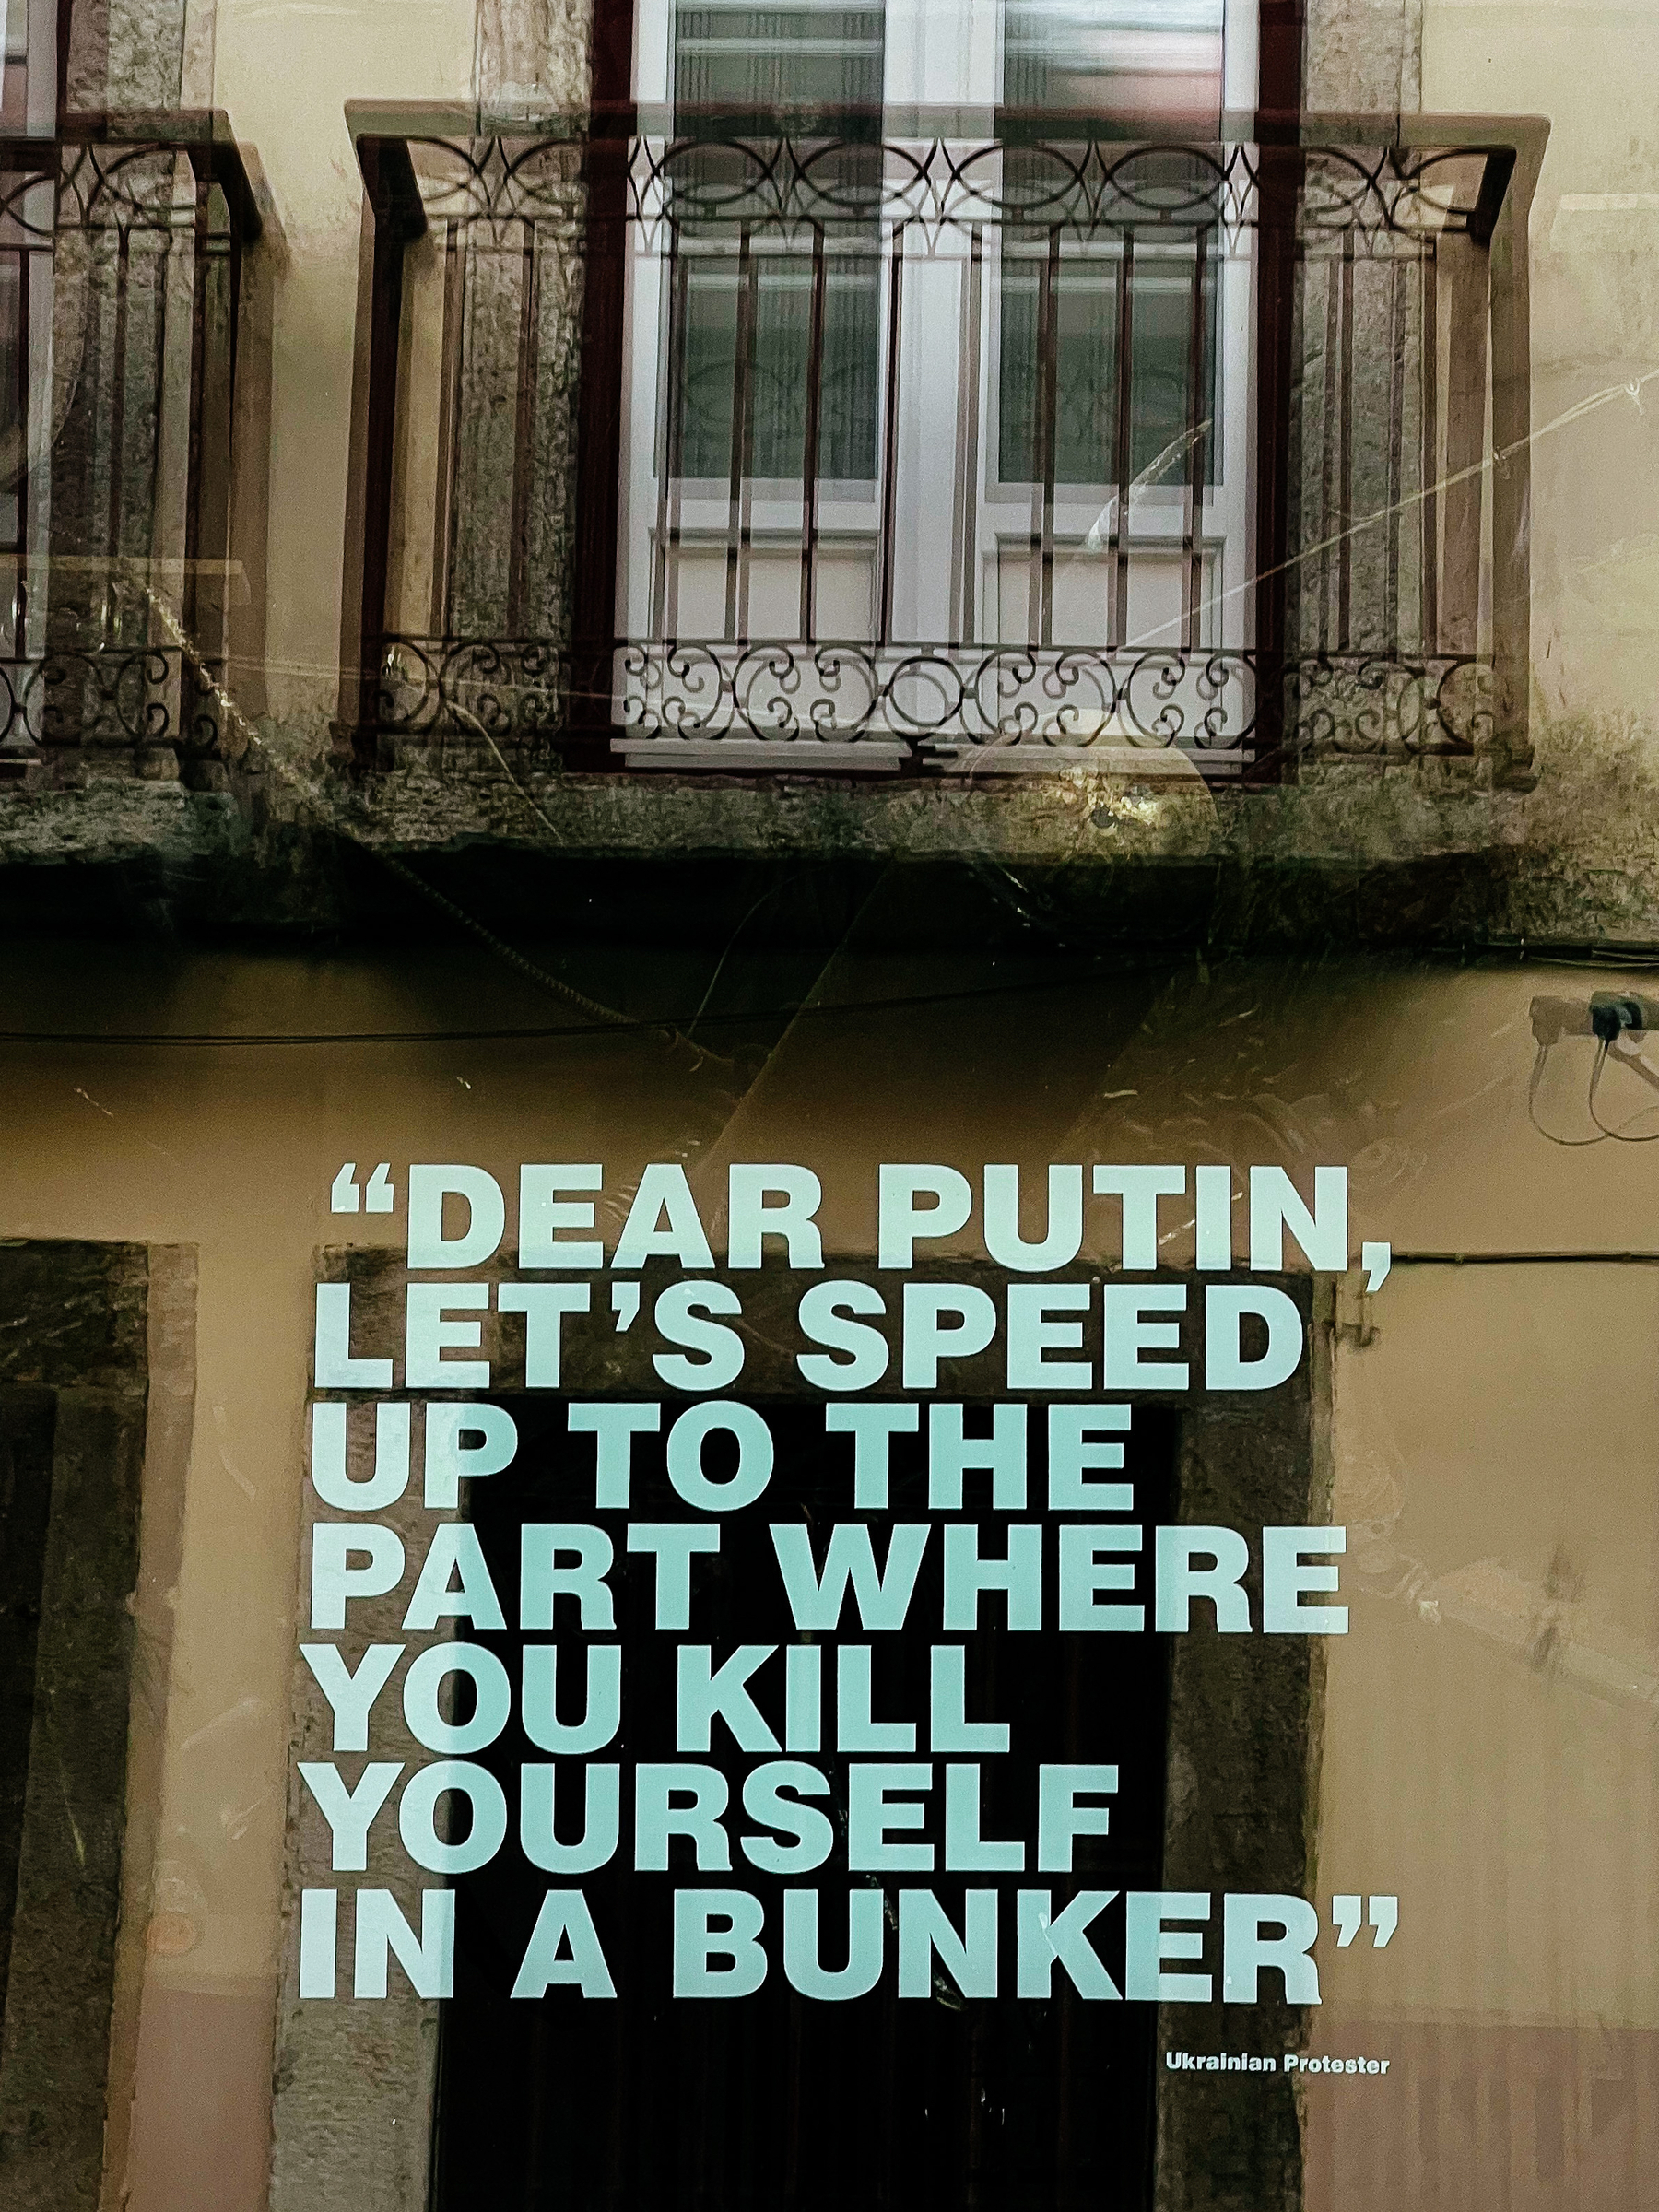 Sticker on a window, with the text “DEAR PUTIN, LET’S SPEED UP TO THE PART WHERE YOU KILL YOURSELF IN A BUNKER”